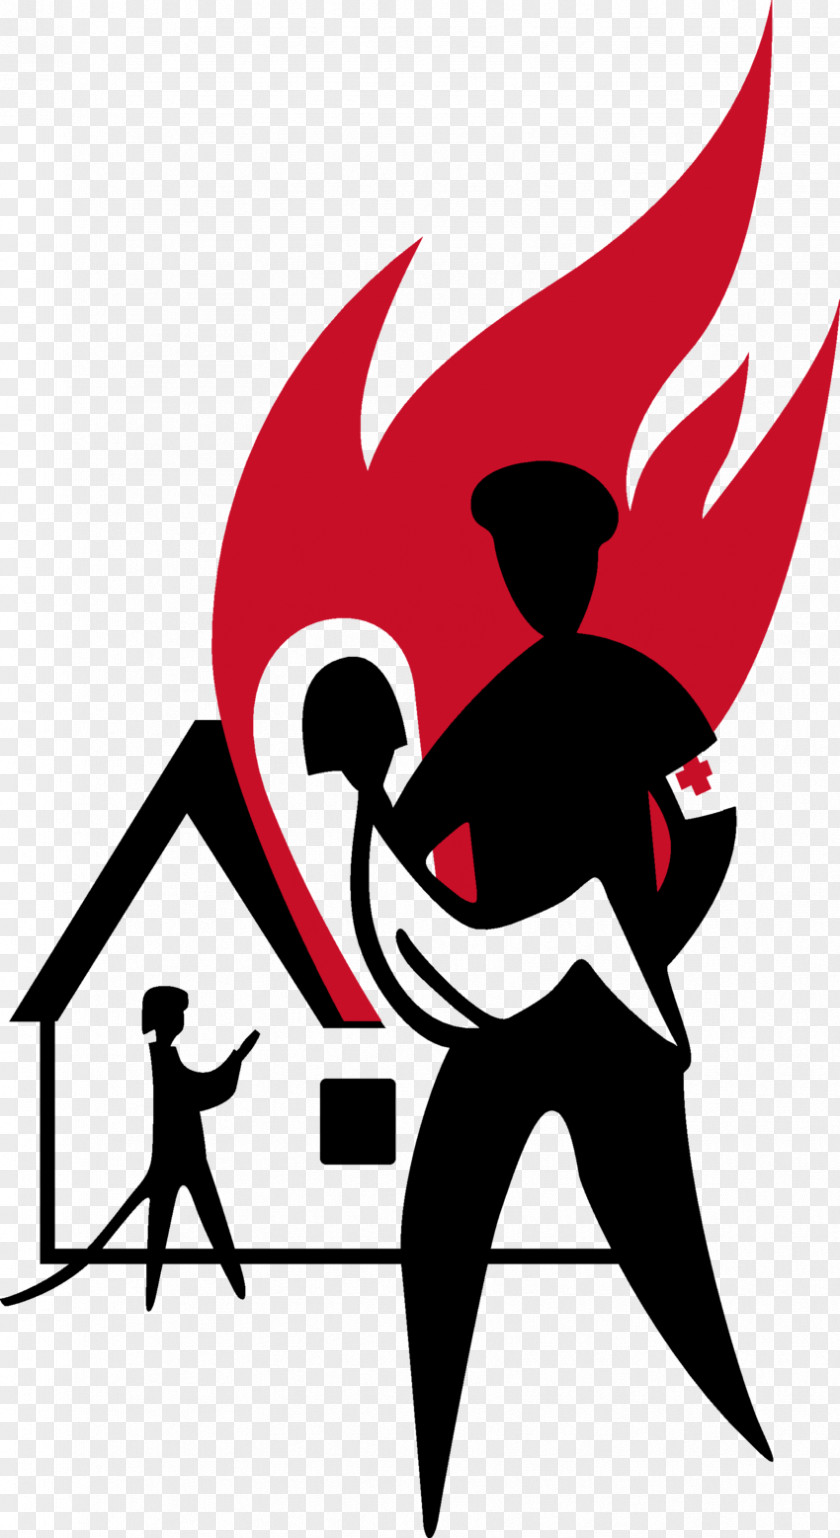 Firefighter Art Silhouette PNG